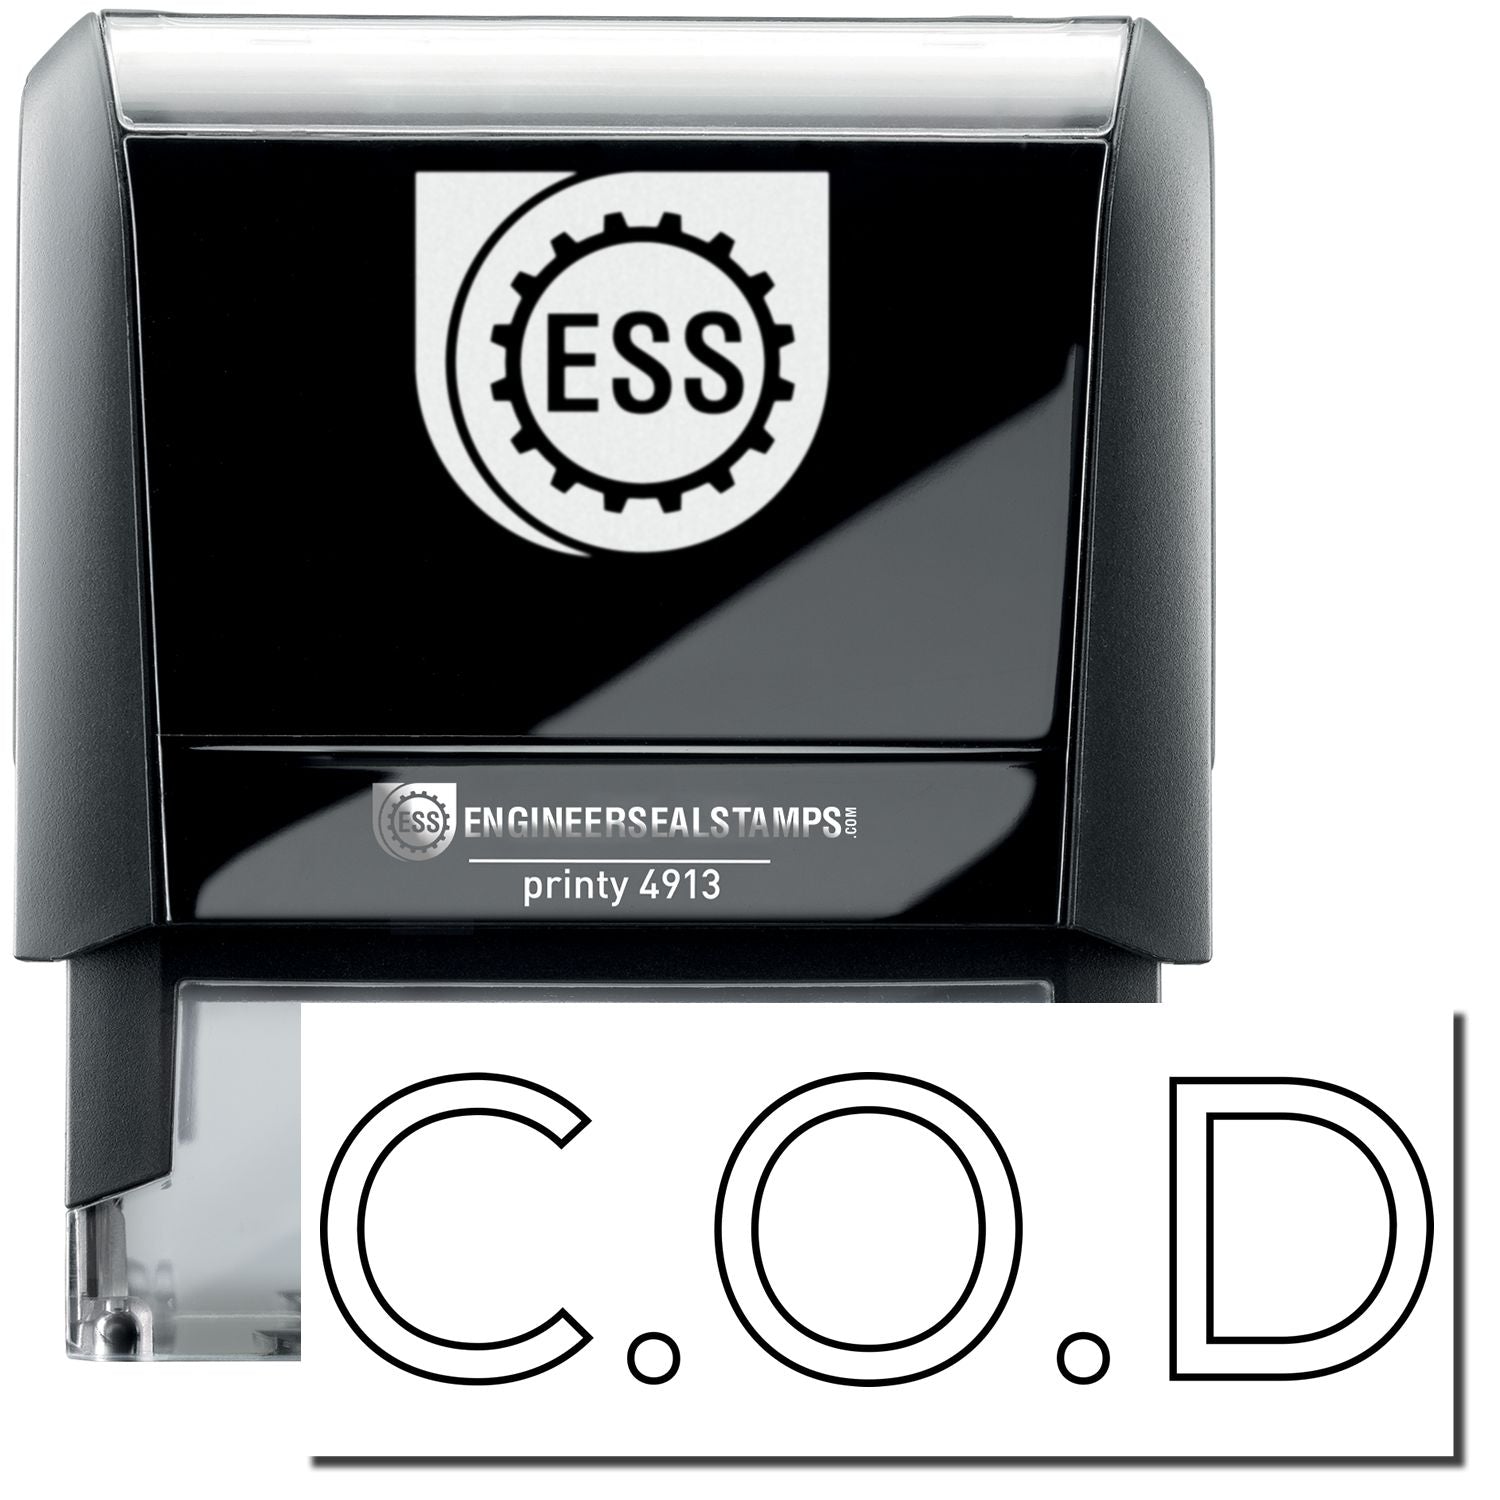 A self-inking stamp with a stamped image showing how the text "C.O.D." in a large outline font is displayed by it after stamping.